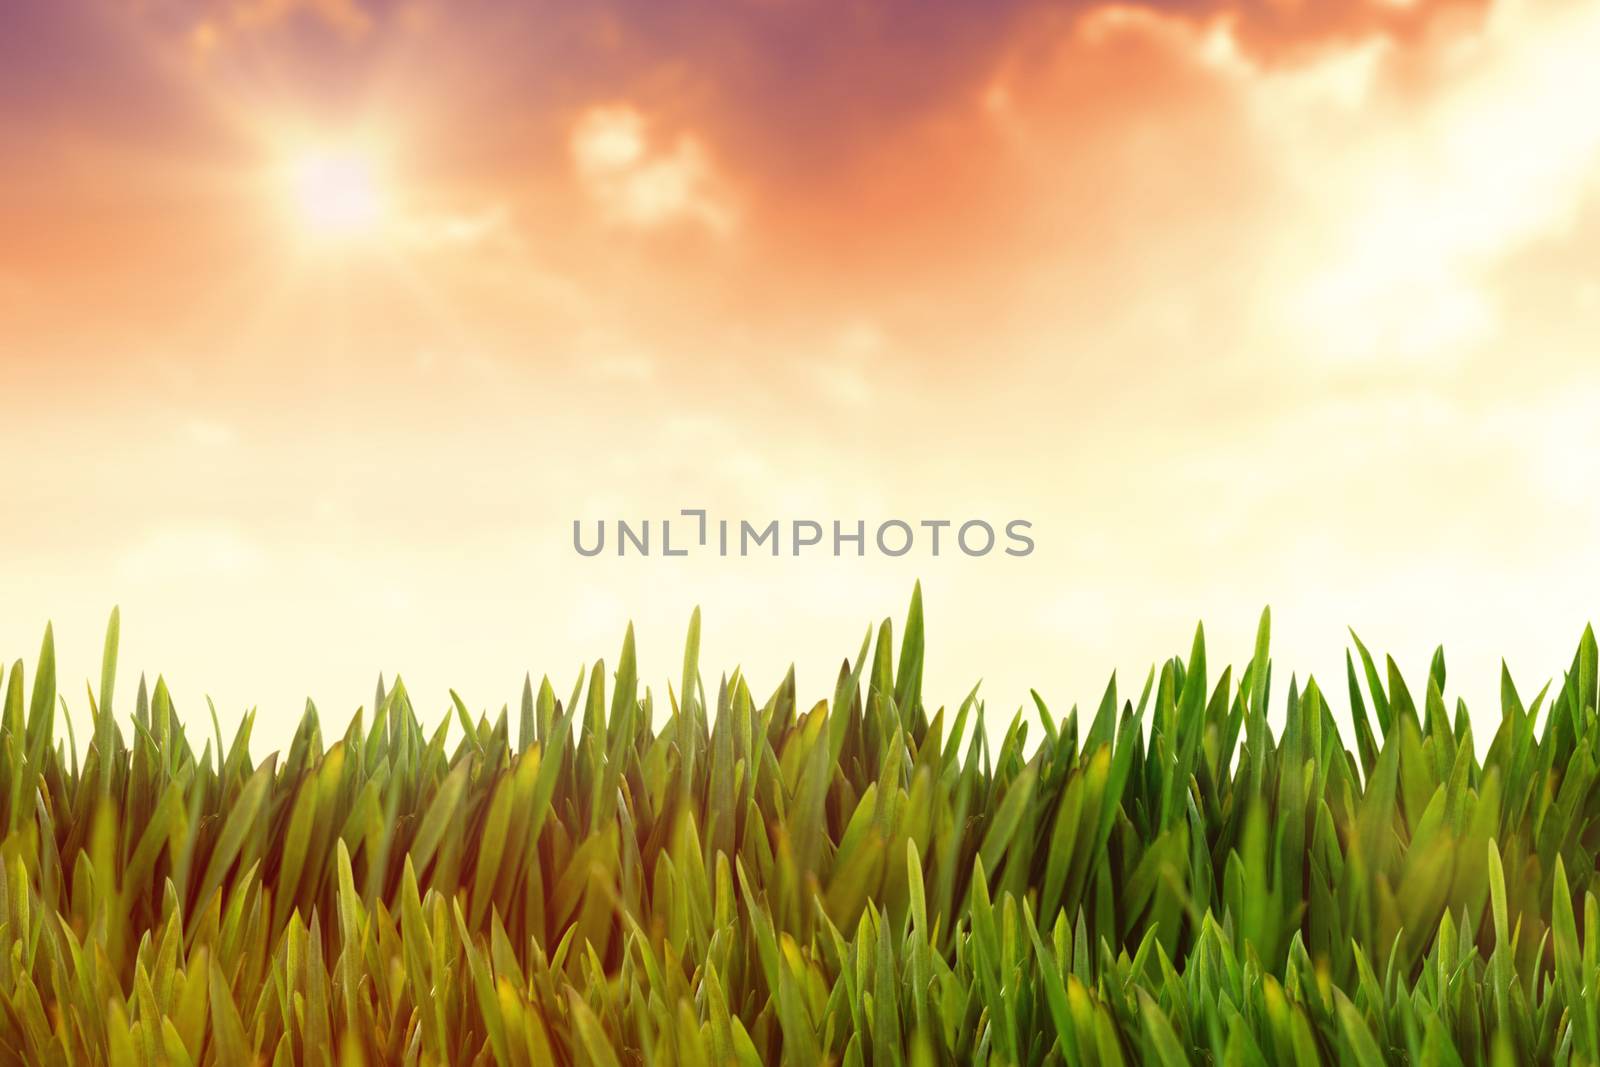 Grass growing outdoors against sunset with clouds